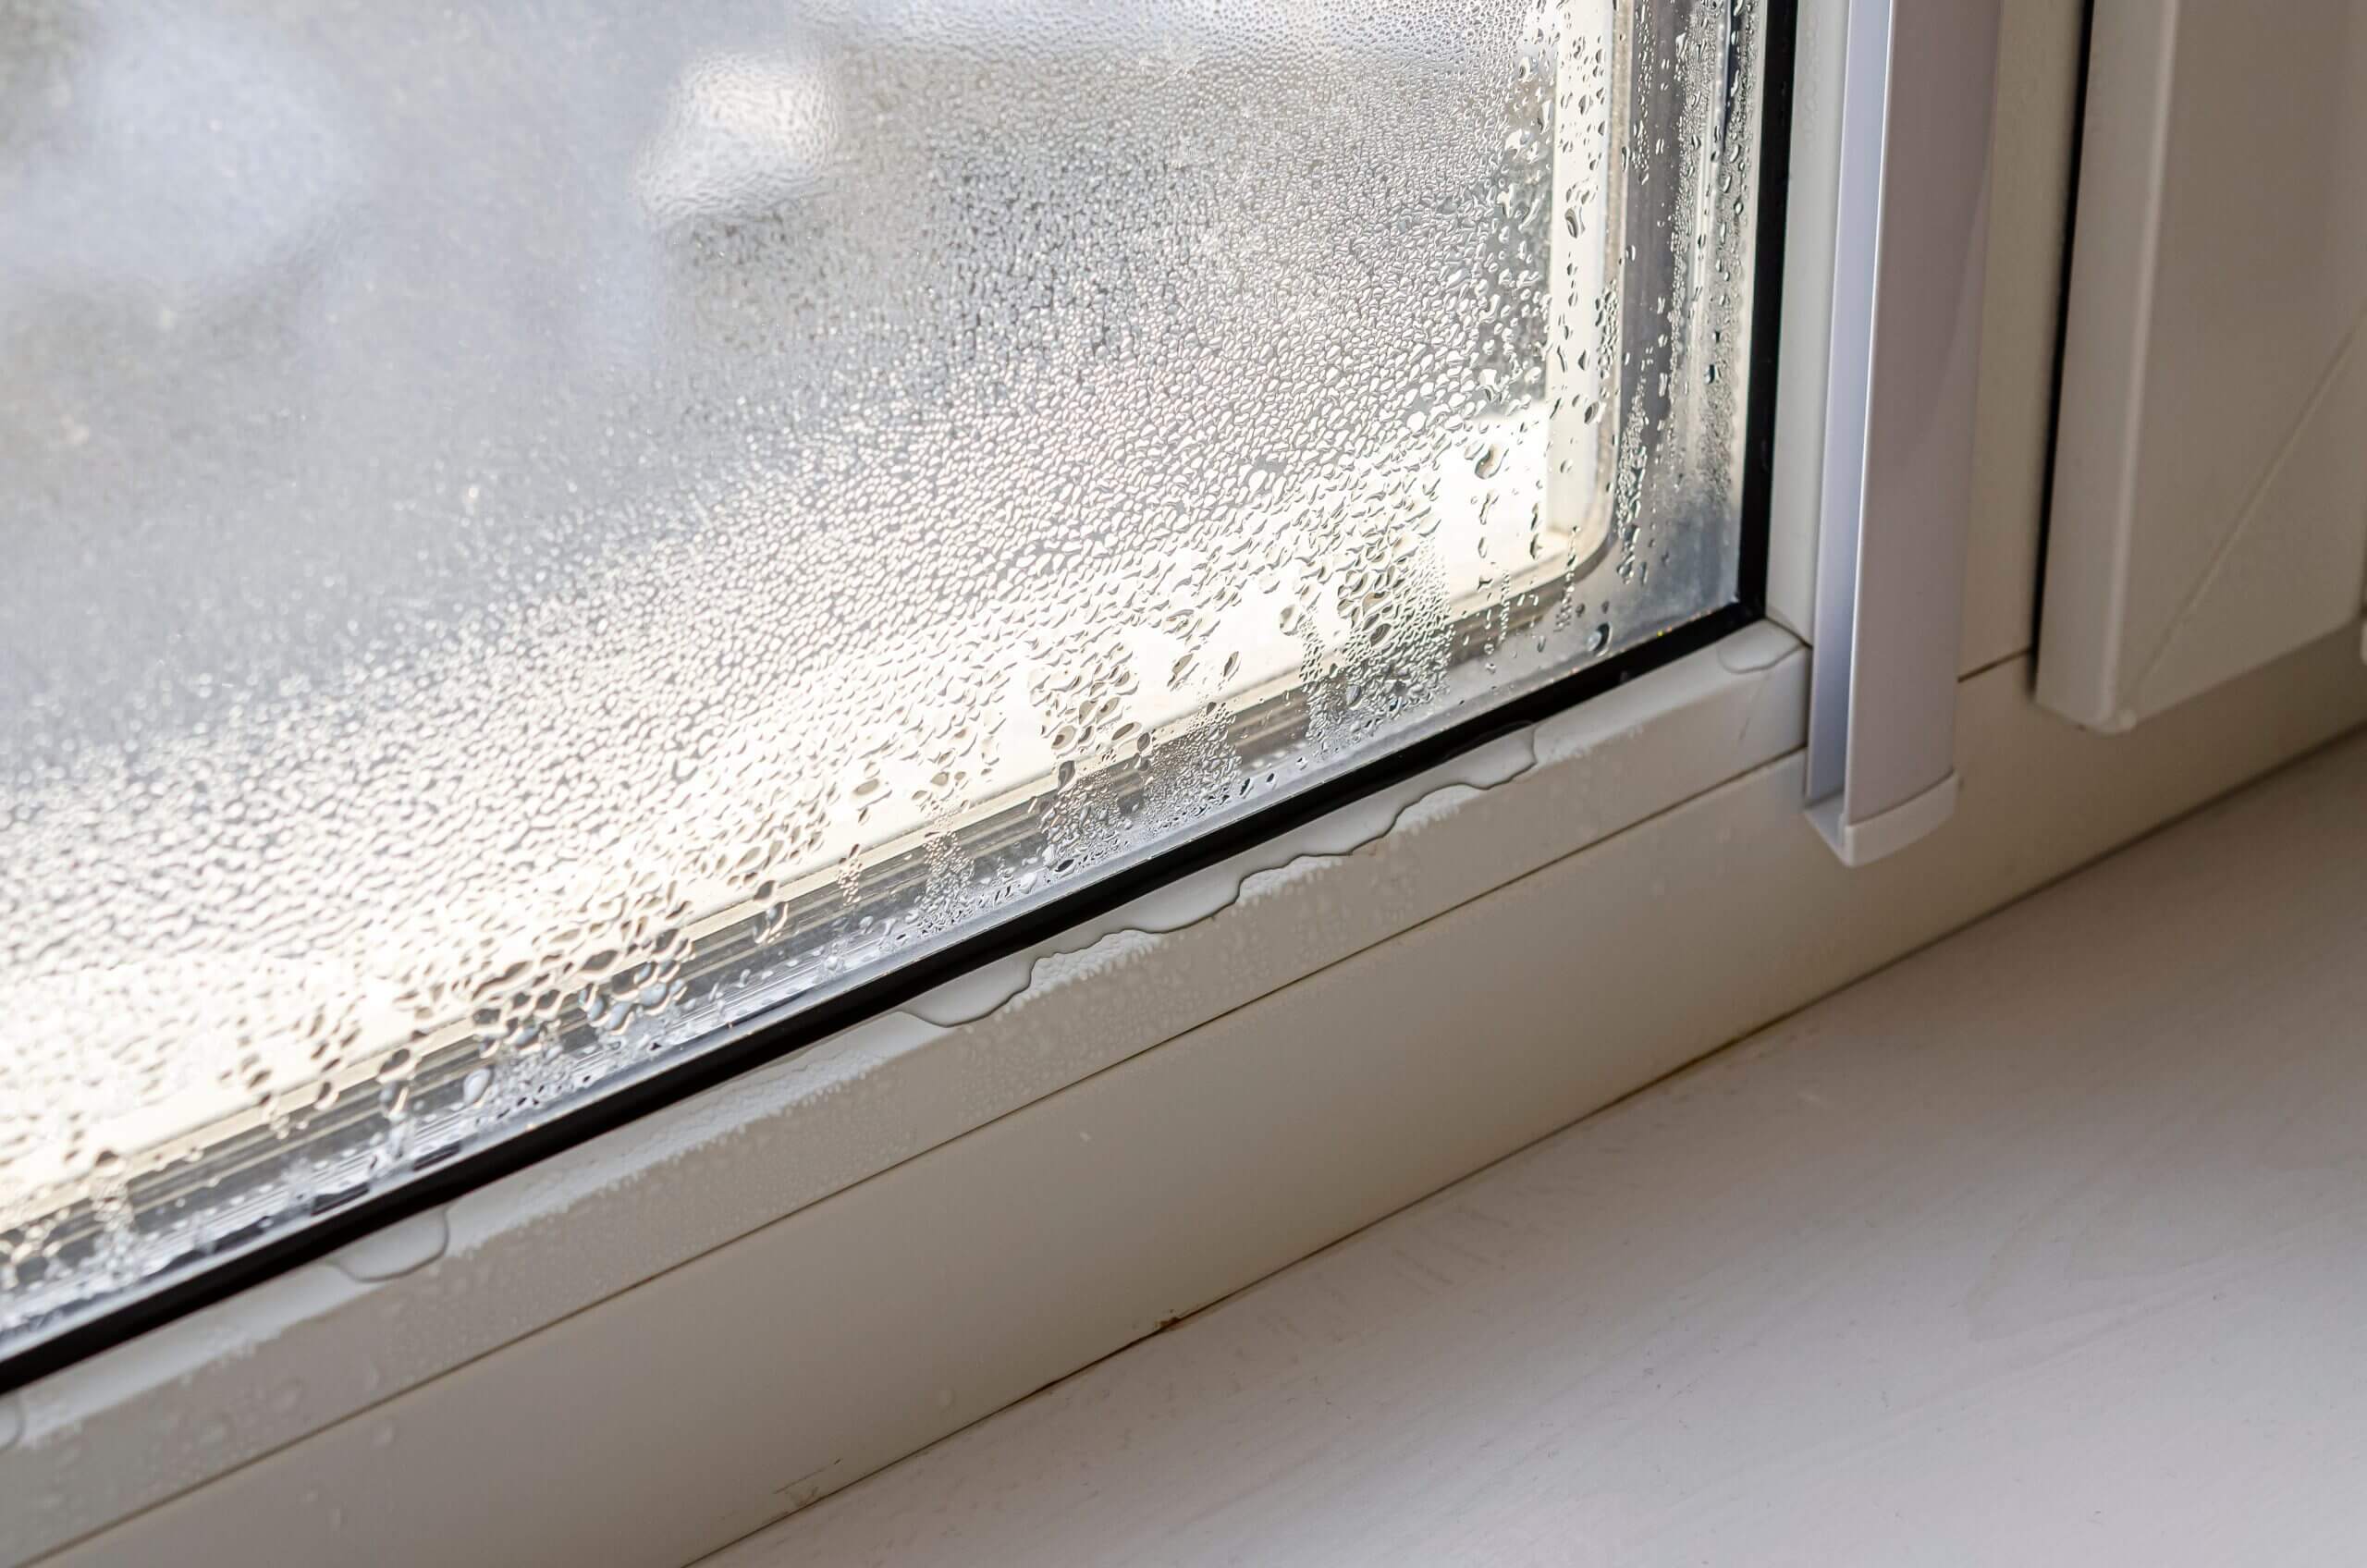 Leaky Window Leading to Condensation - Preventing Mold Growth